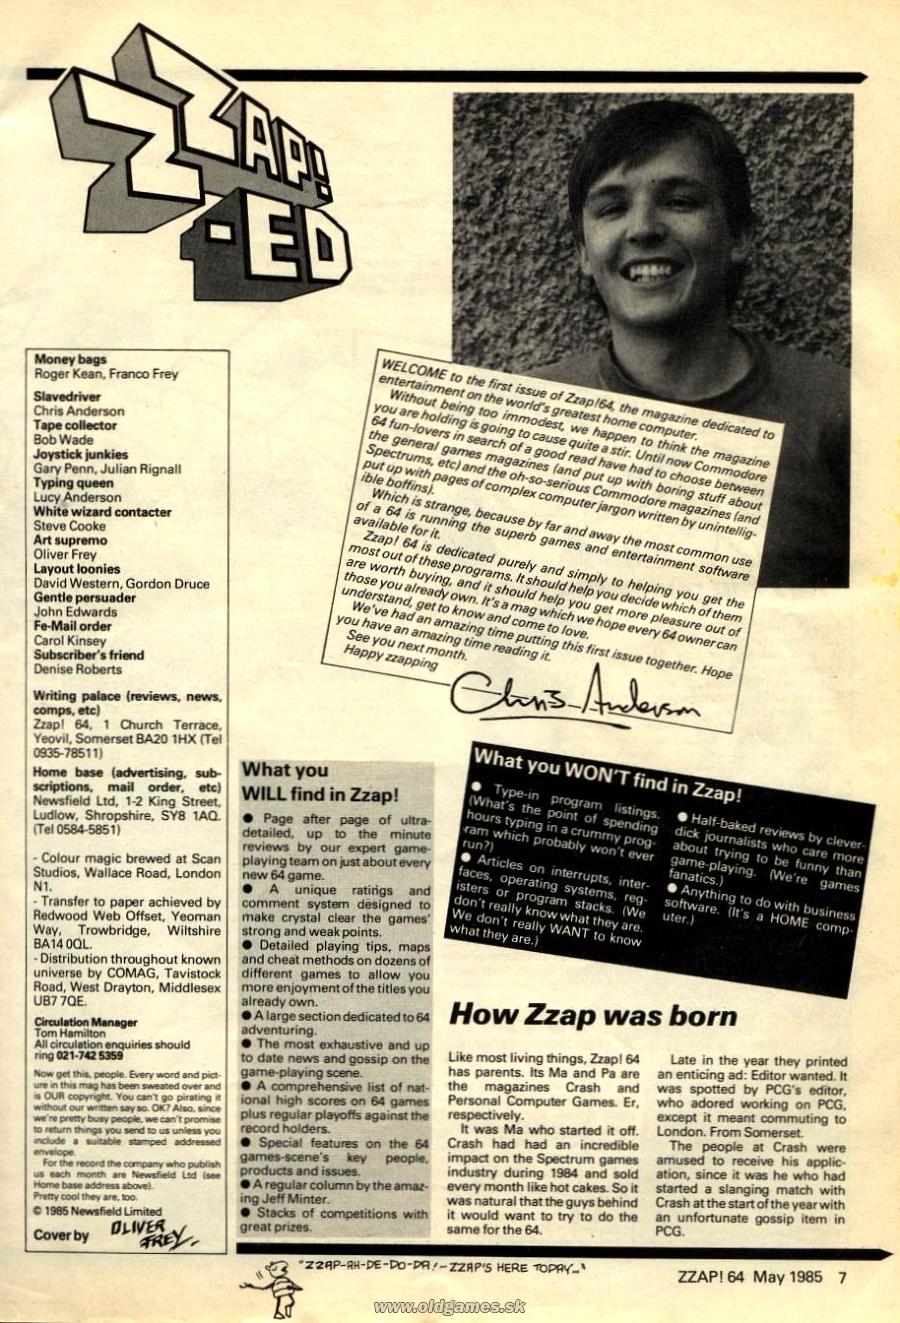 Zzap ED, Welcome